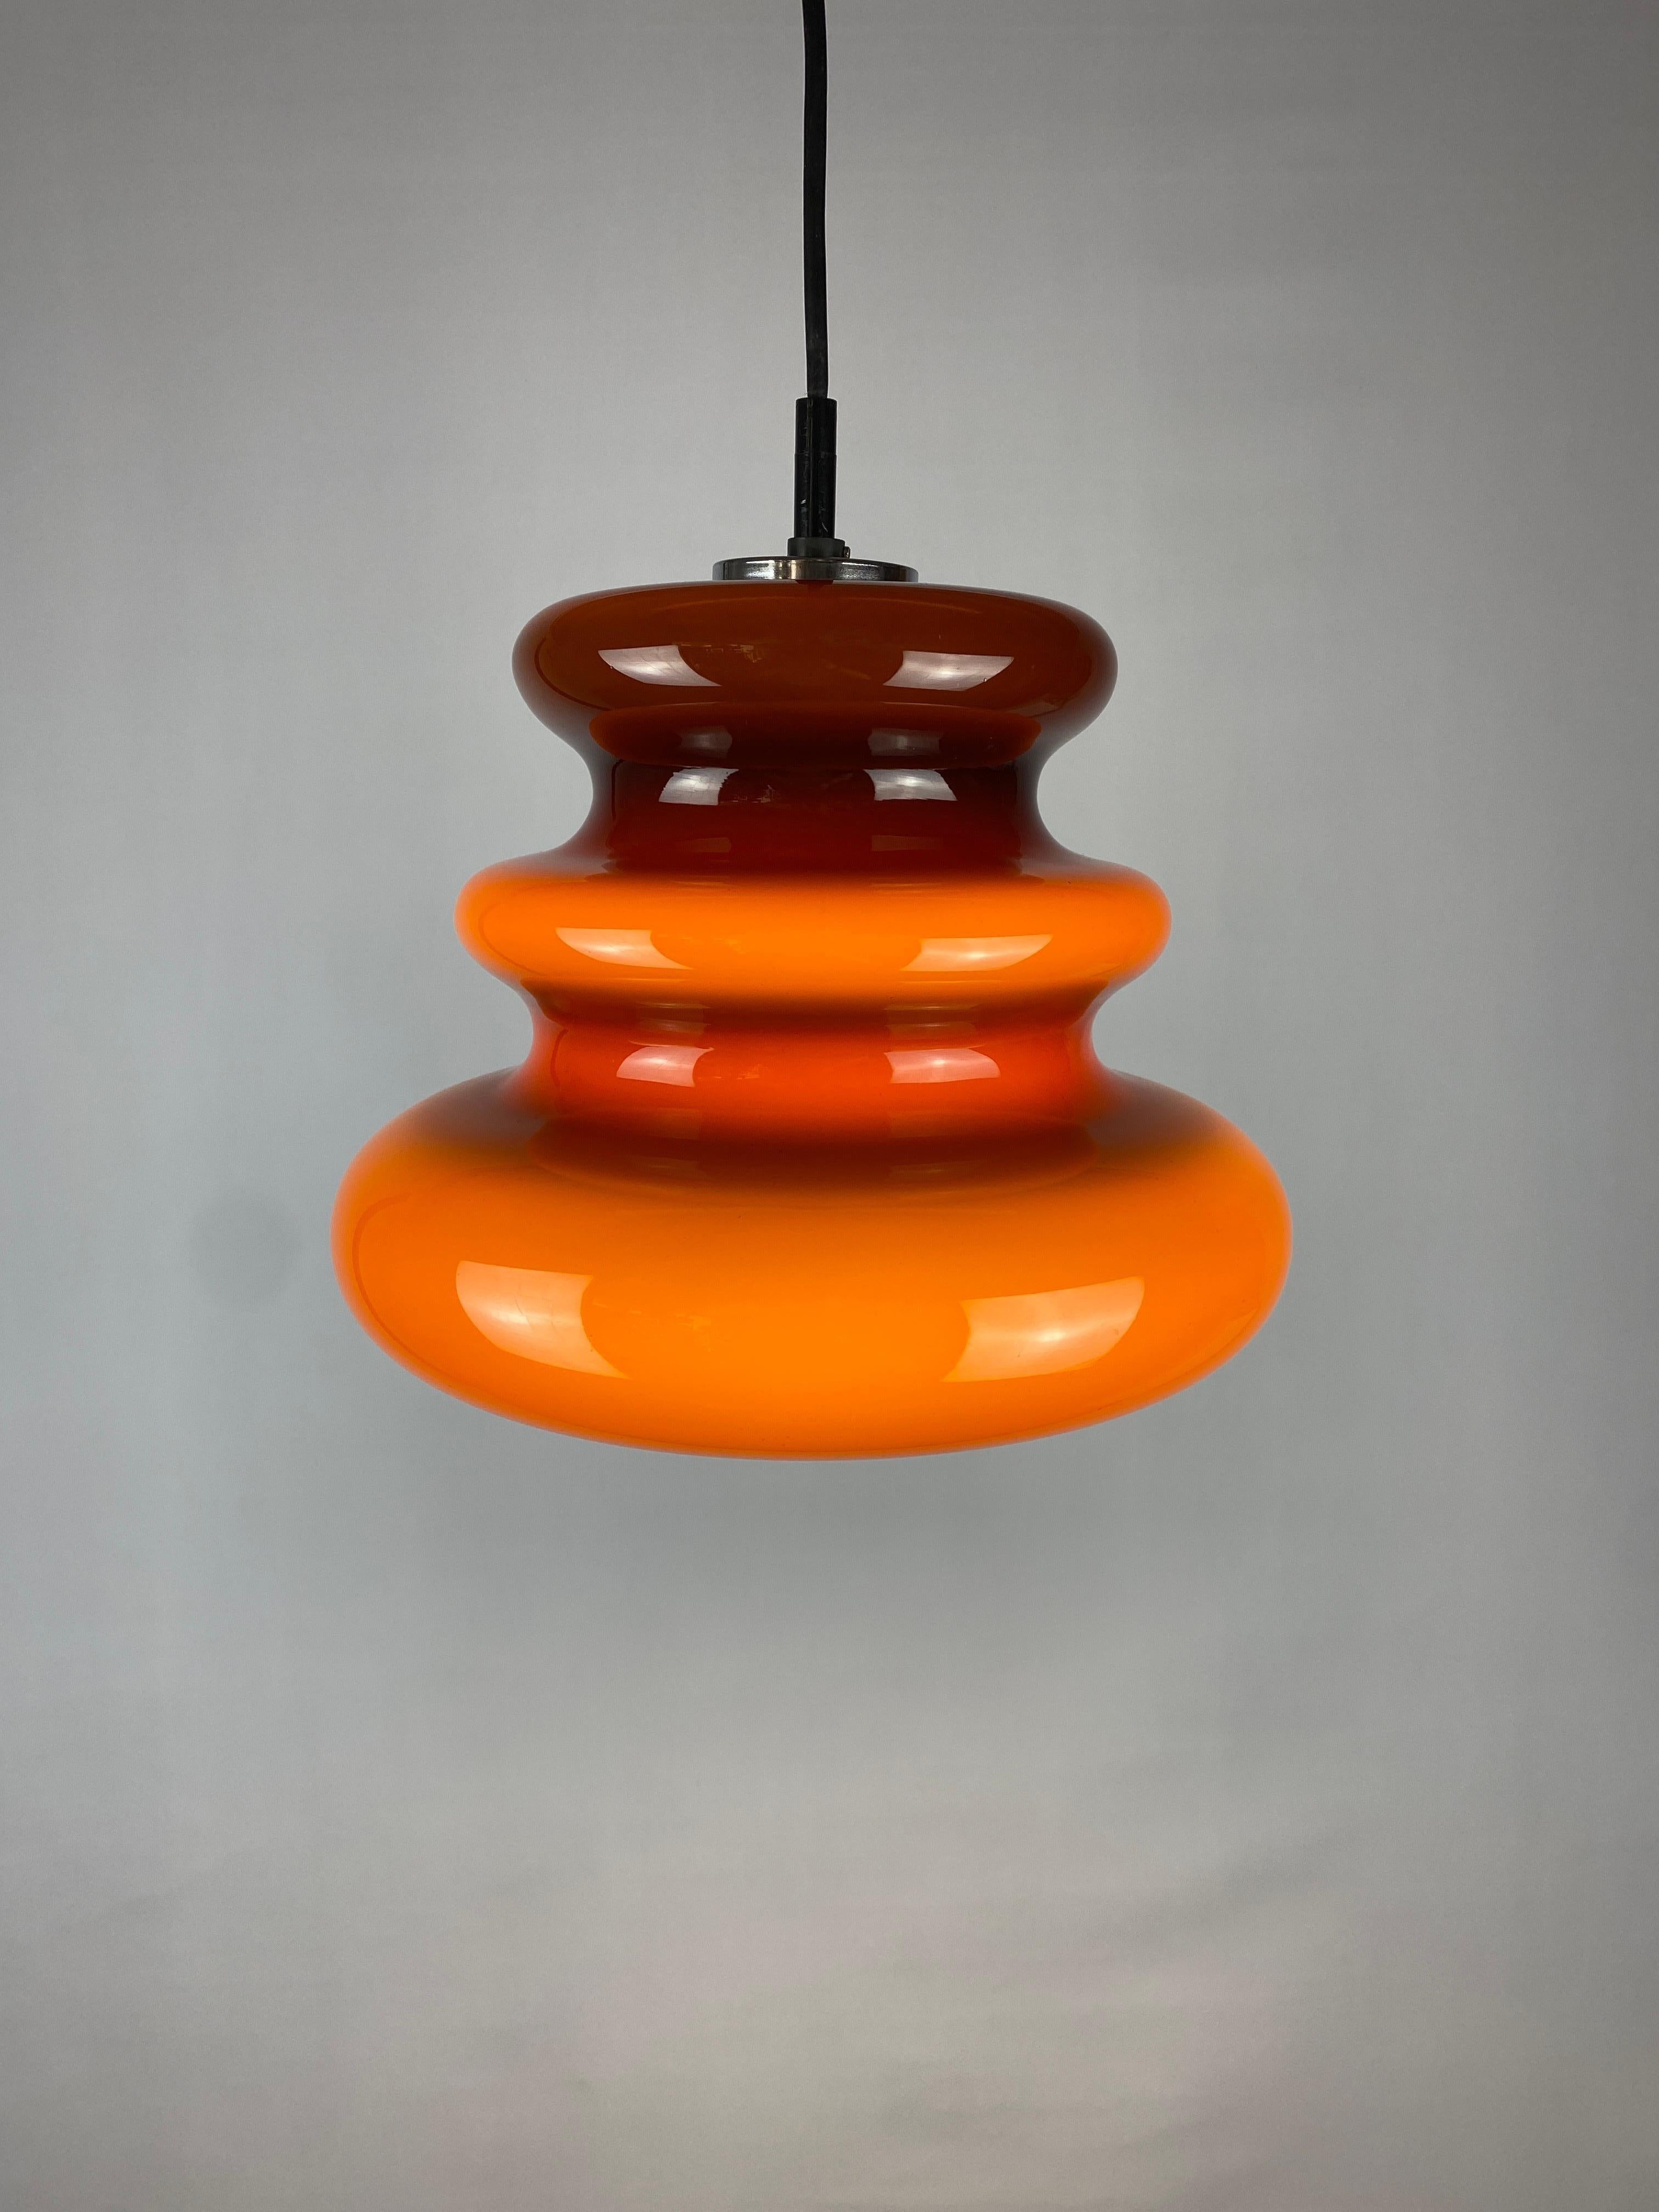 Custom order of 6 beautiful brown / caramelize colored pendant lamps. This brown opaline glass pendant light is made by the German company Peill and Putzler around 1960. Gives very nice soft light, and when lit the brown glass turns into a caramel